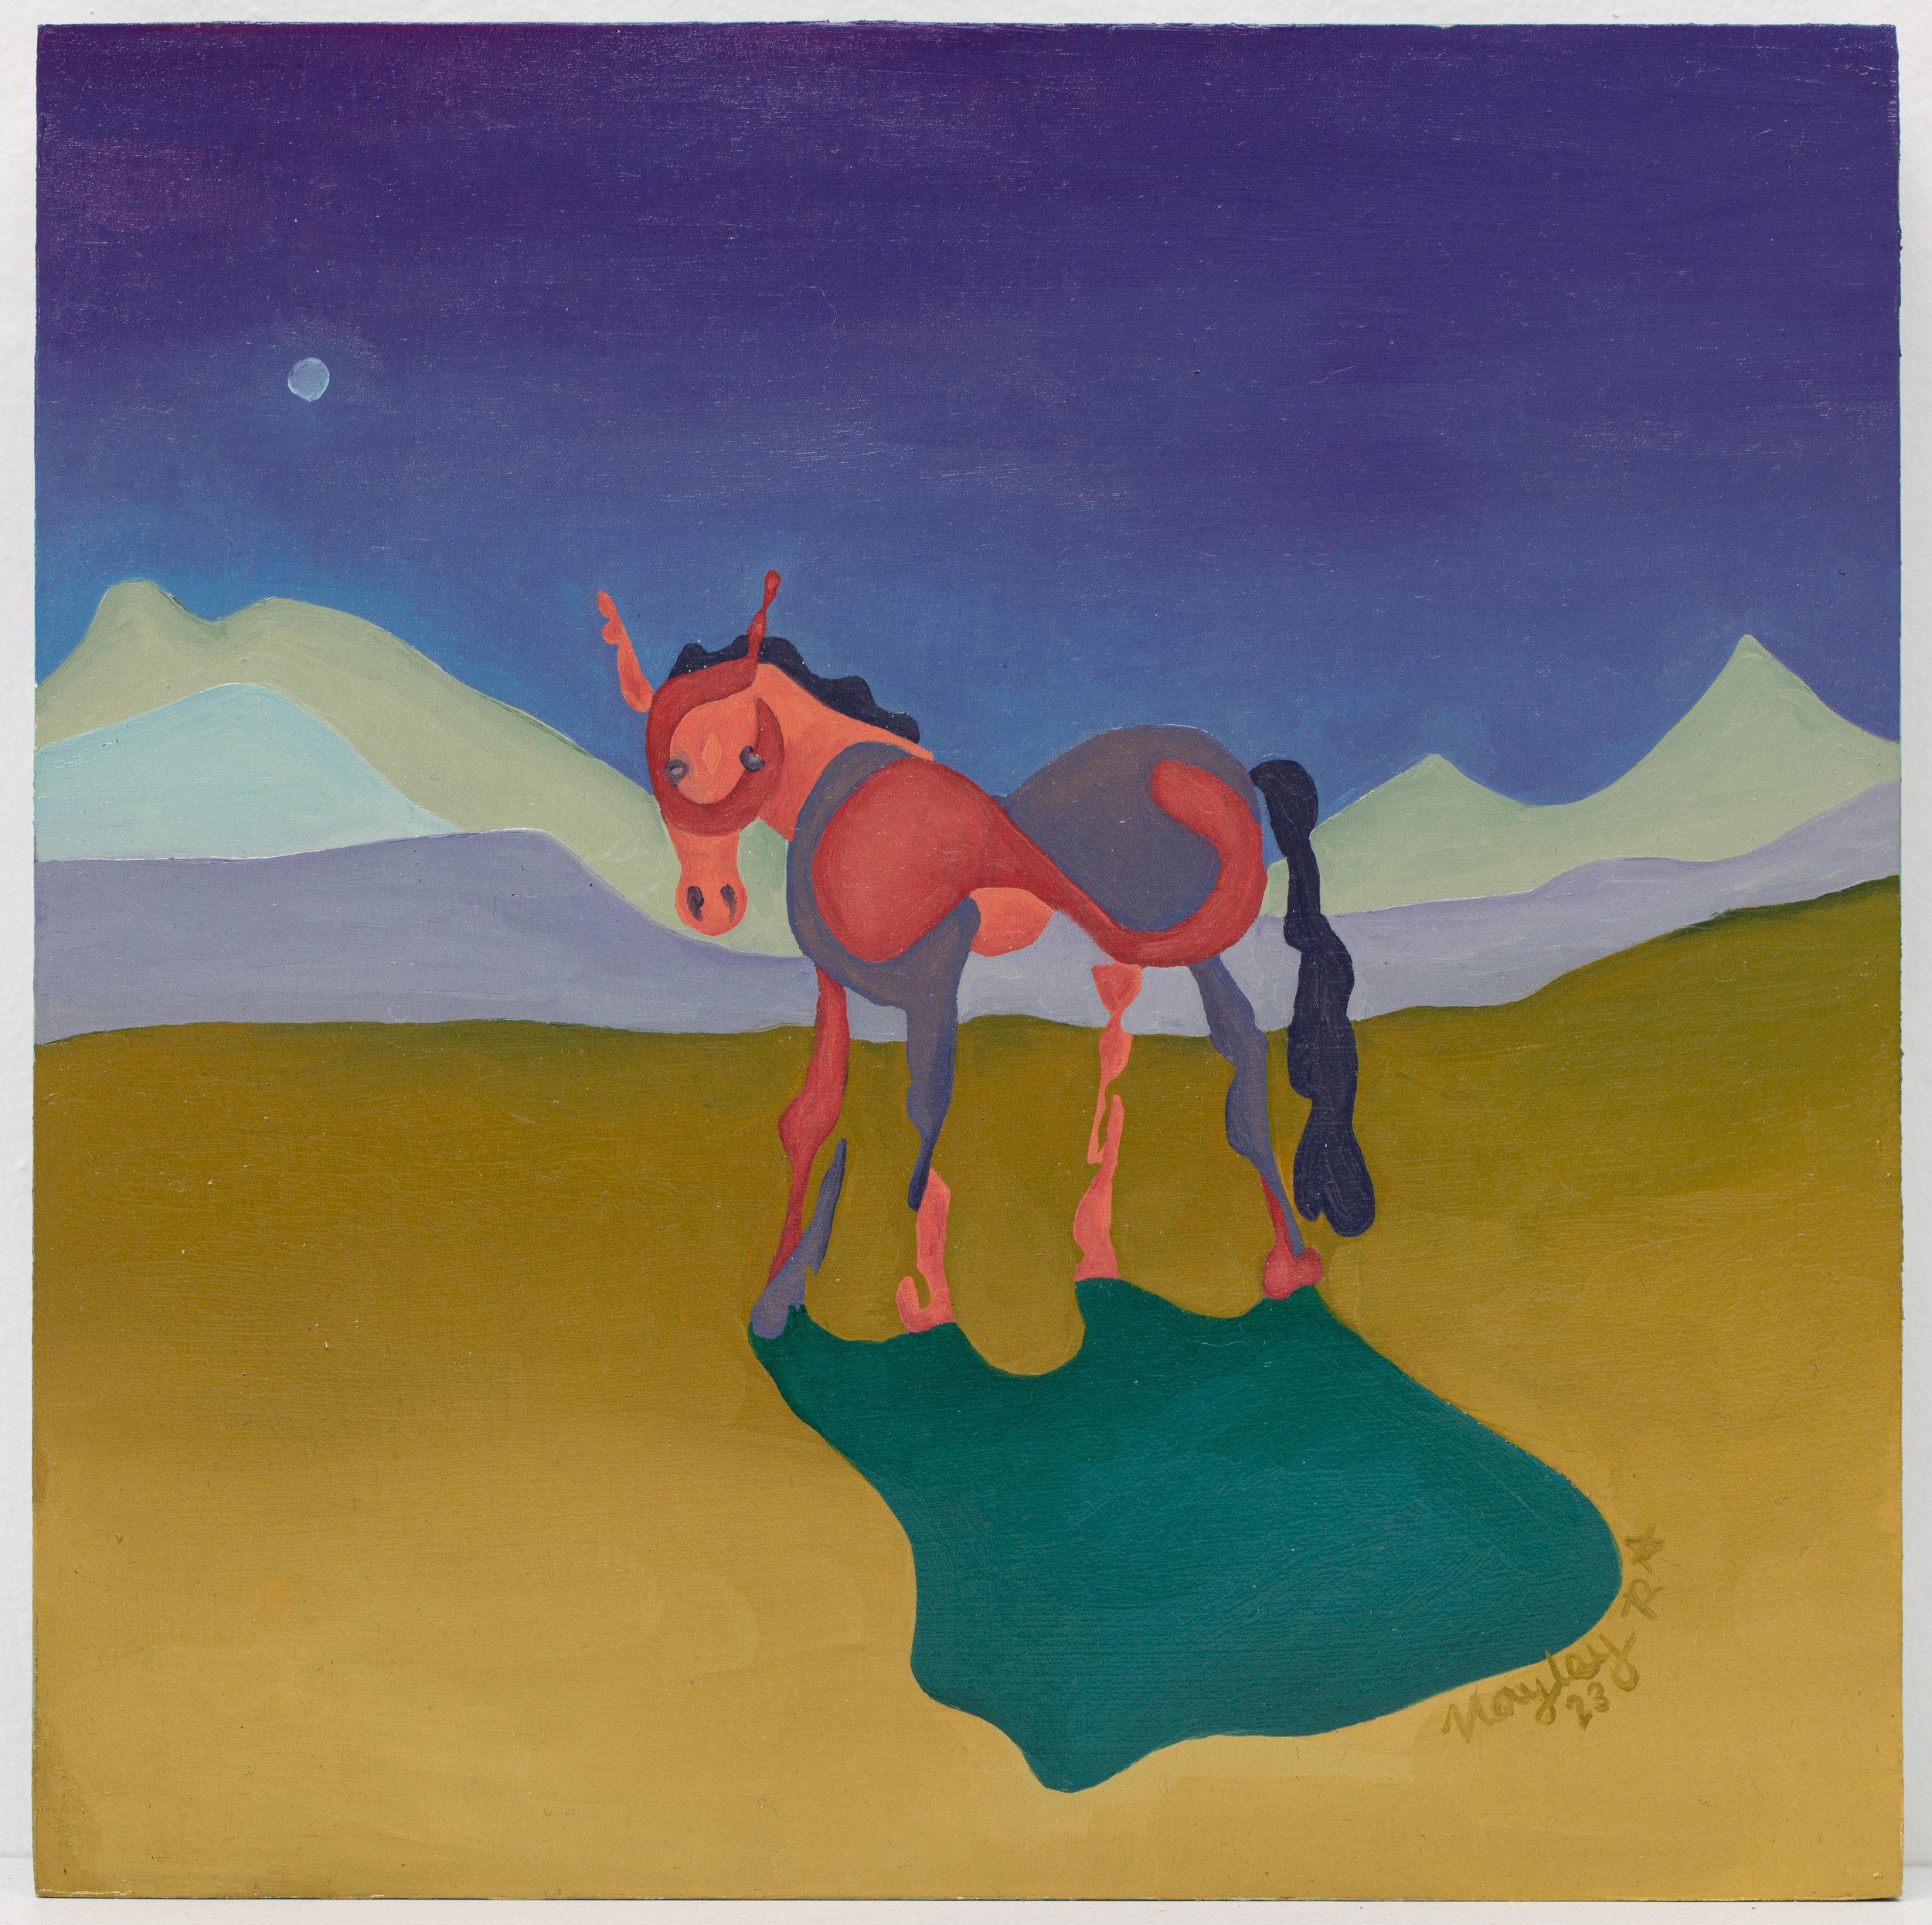   Darling Baco in the Foothills   Oil paint on wood panel  8 x 8 inches 